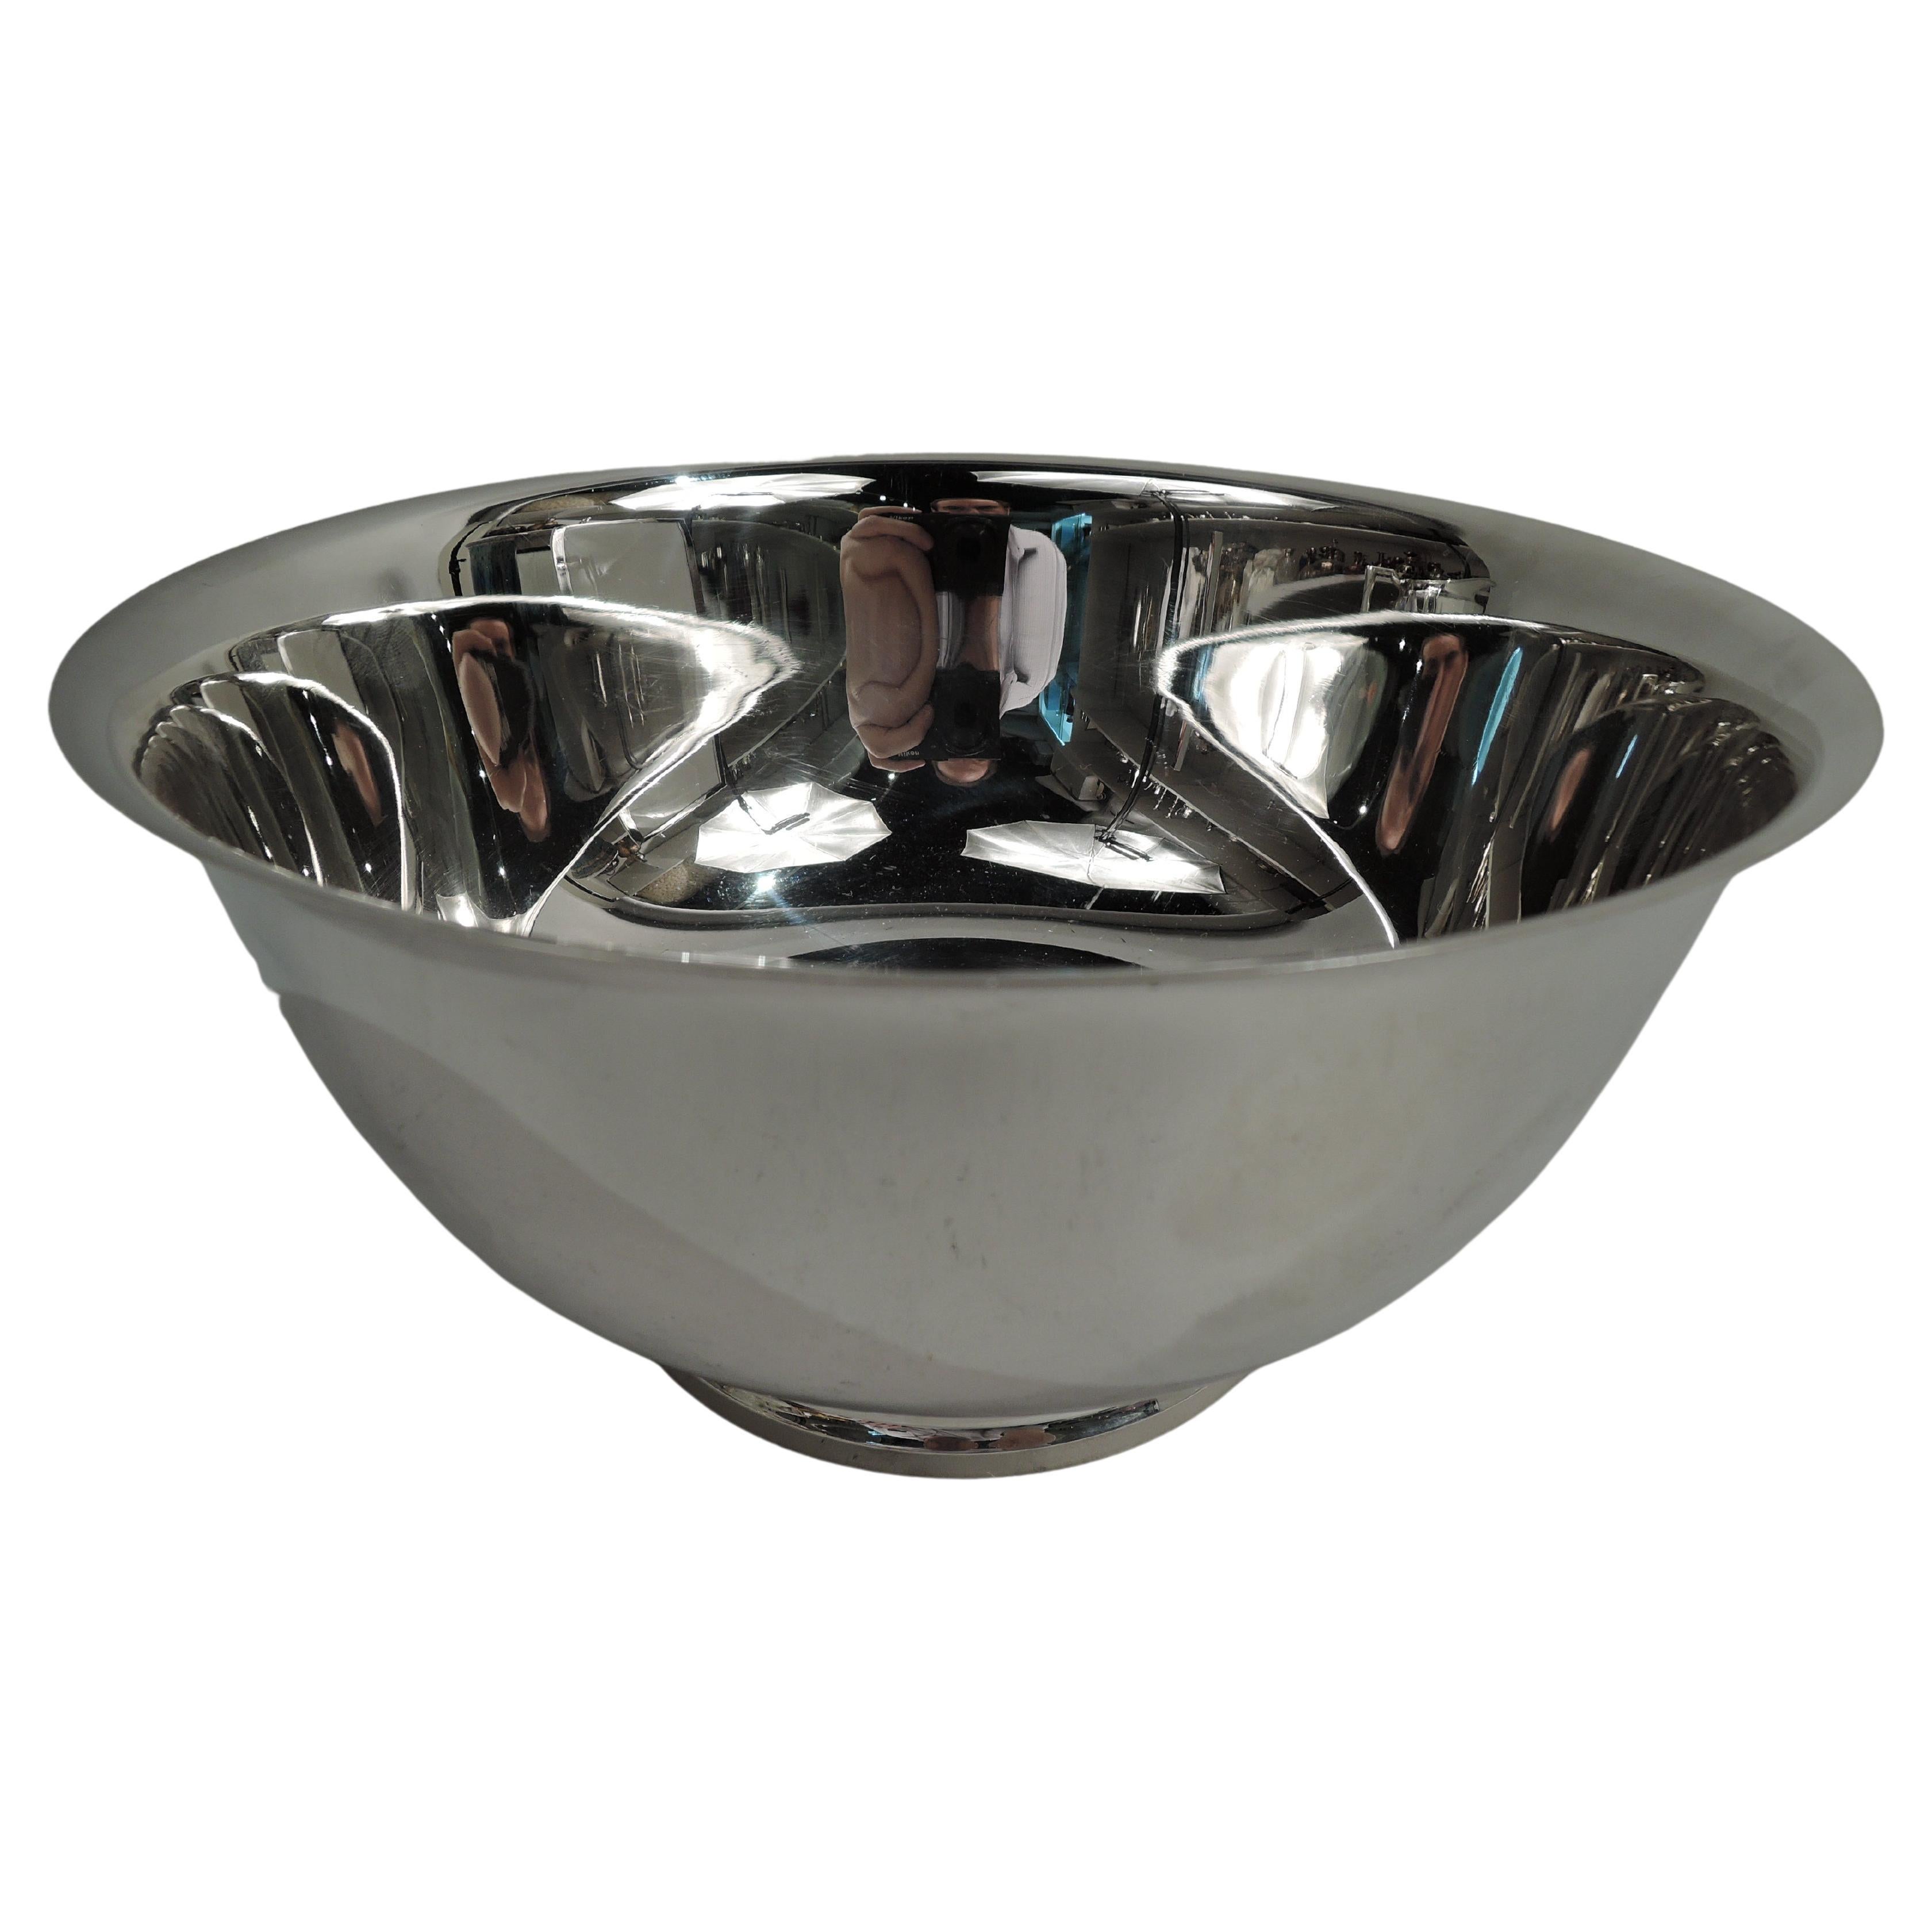 Tiffany Traditional Sterling Silver Revere Bowl